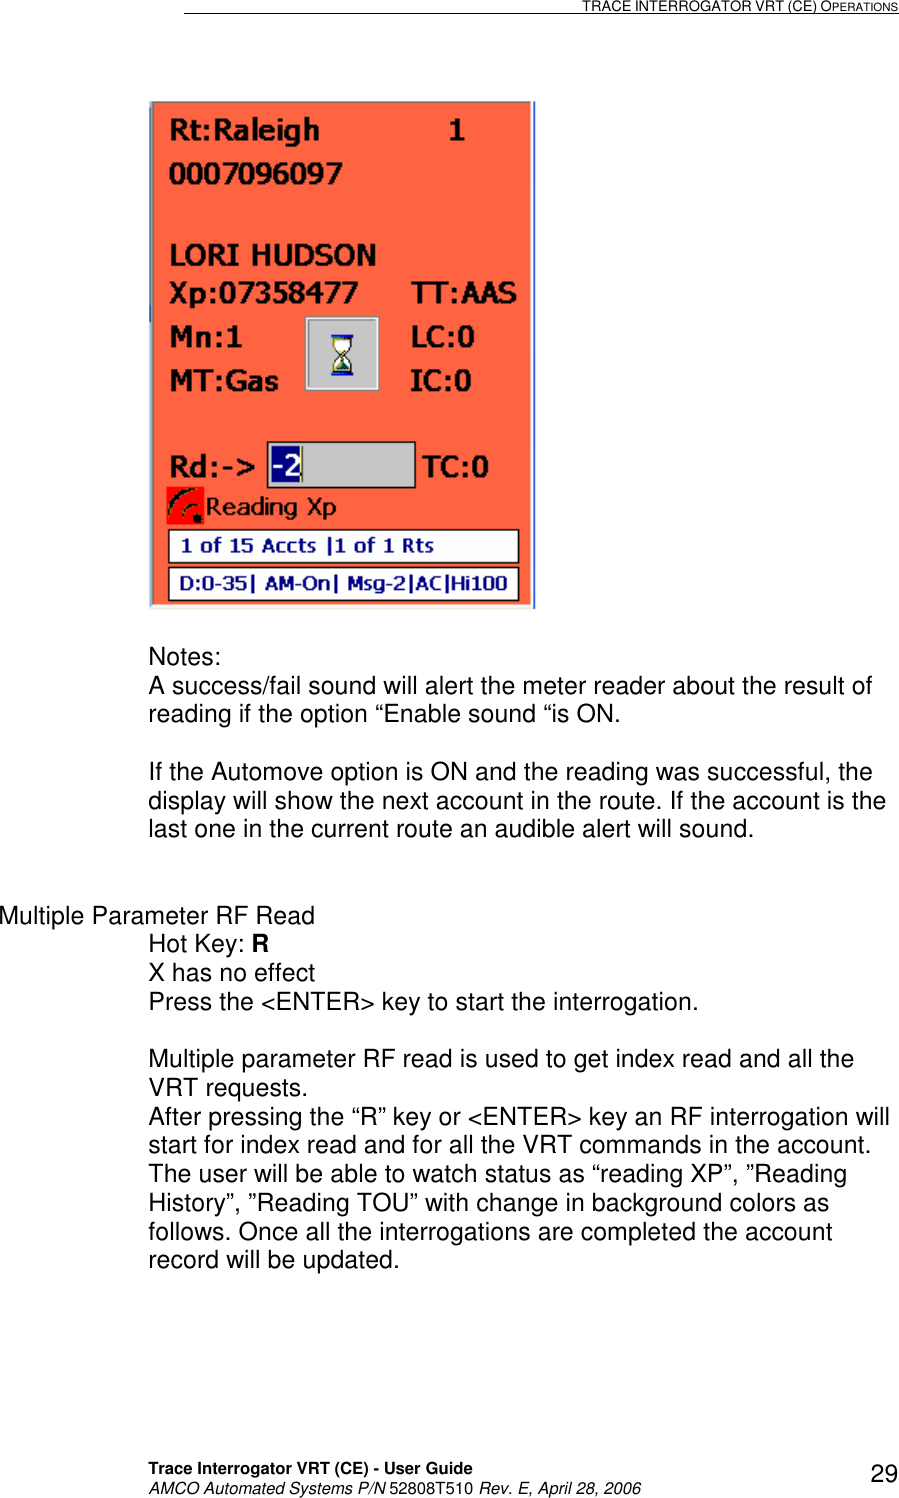                                                                                                                              TRACE INTERROGATOR VRT (CE) OPERATIONS    Trace Interrogator VRT (CE) - User Guide   AMCO Automated Systems P/N 52808T510 Rev. E, April 28, 2006 29  Notes:  A success/fail sound will alert the meter reader about the result of reading if the option “Enable sound “is ON.    If the Automove option is ON and the reading was successful, the display will show the next account in the route. If the account is the last one in the current route an audible alert will sound.   Multiple Parameter RF Read Hot Key: R   X has no effect Press the &lt;ENTER&gt; key to start the interrogation.  Multiple parameter RF read is used to get index read and all the VRT requests.   After pressing the “R” key or &lt;ENTER&gt; key an RF interrogation will start for index read and for all the VRT commands in the account. The user will be able to watch status as “reading XP”, ”Reading History”, ”Reading TOU” with change in background colors as follows. Once all the interrogations are completed the account record will be updated.  